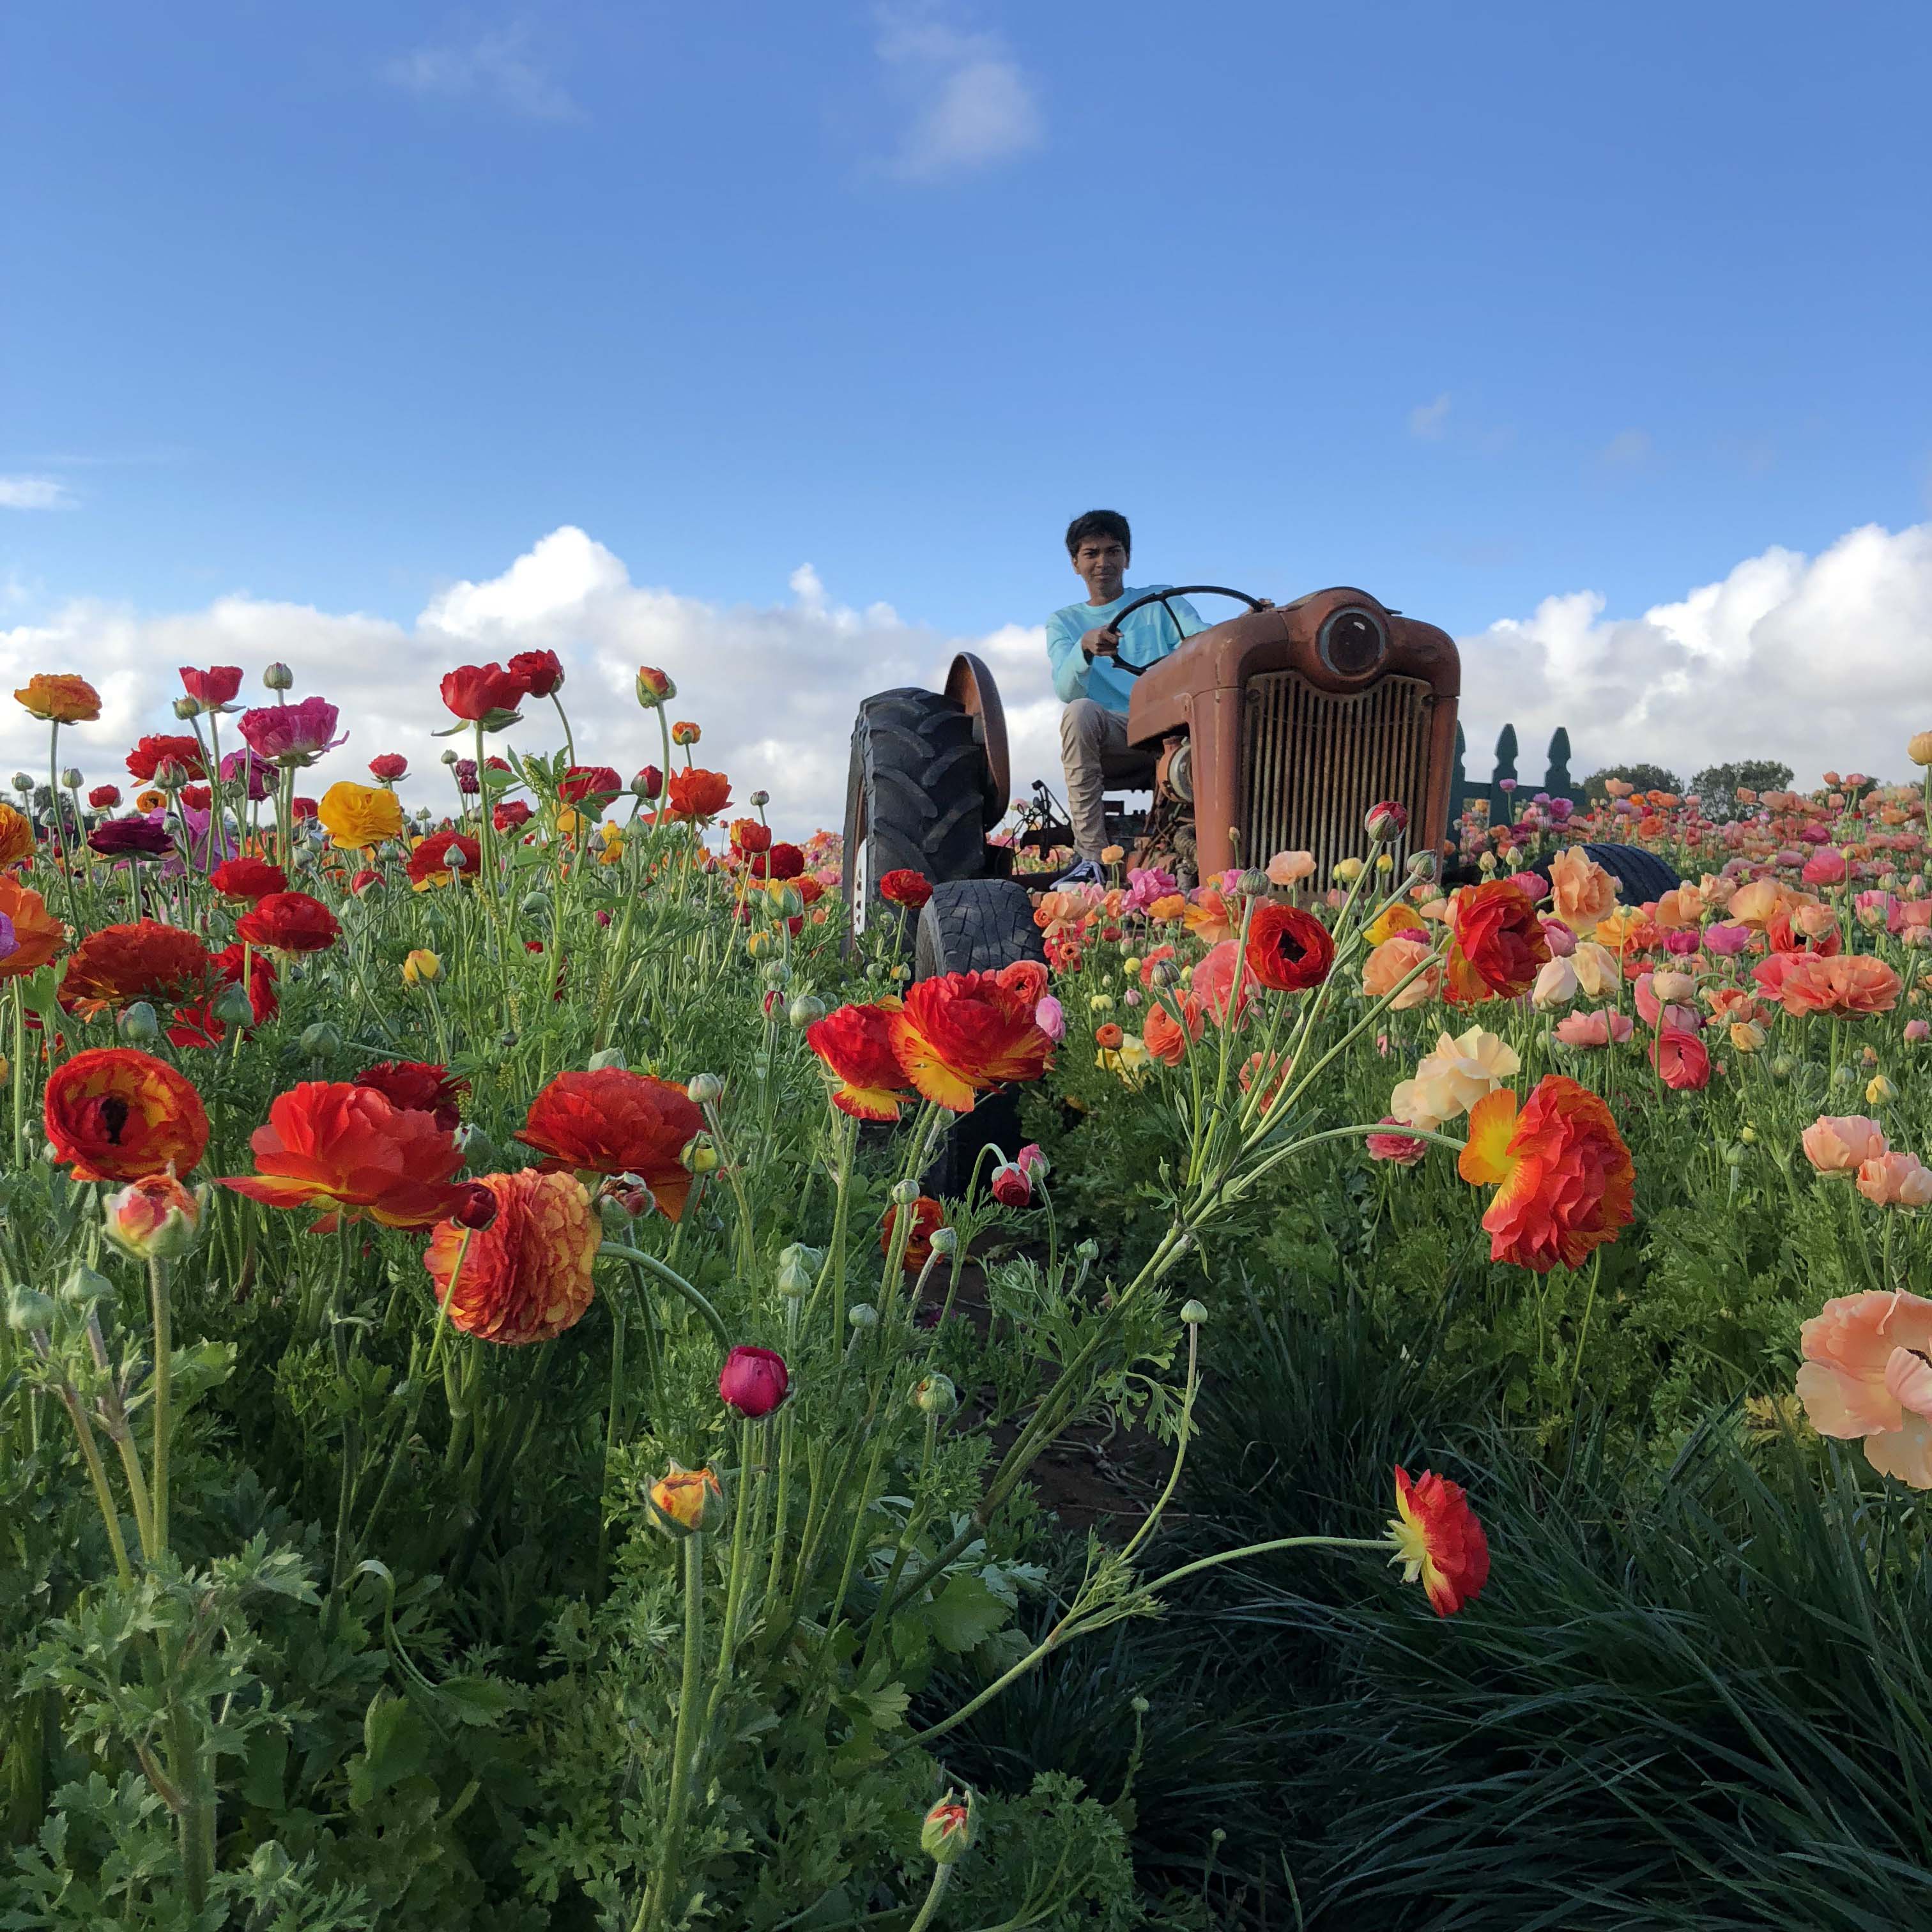 The Flower Fields, Carslbad, San Diego - Photo by Outside Suburbia